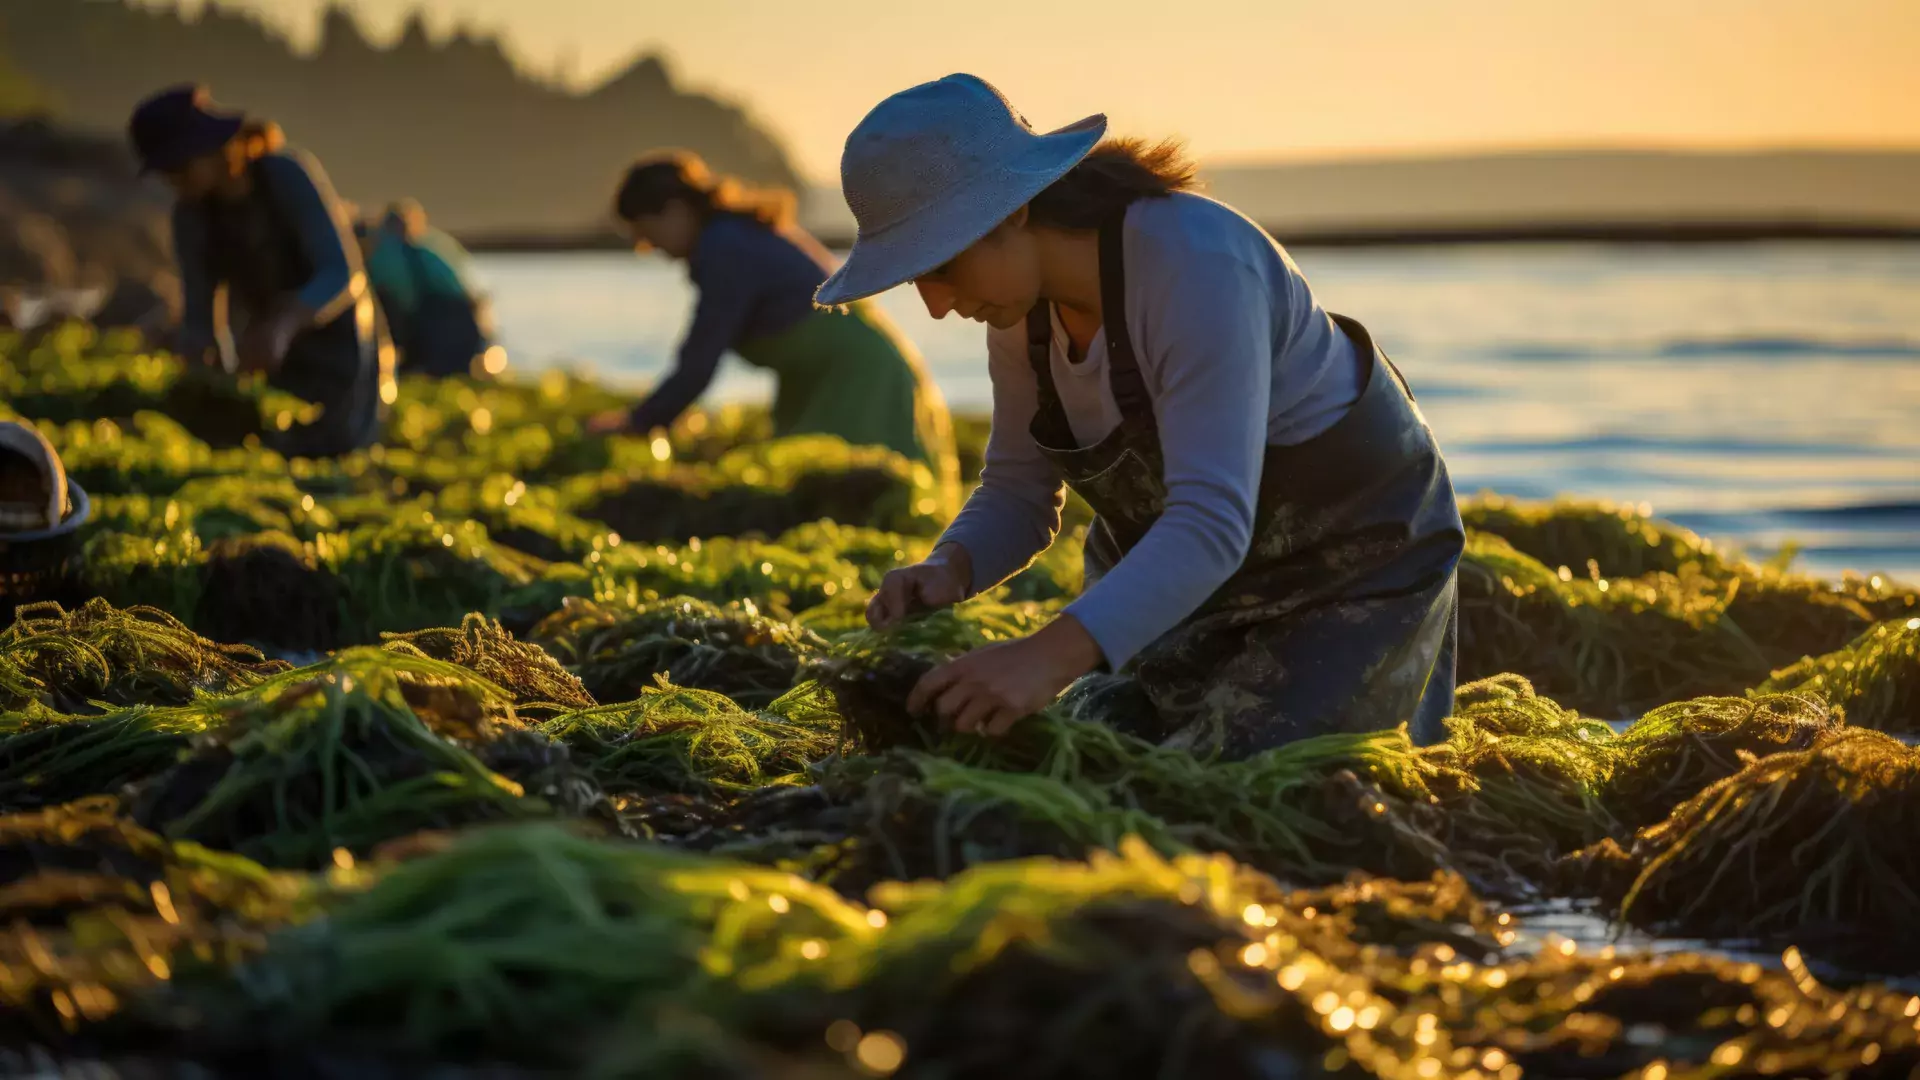 Sustainable seaweed farming practices